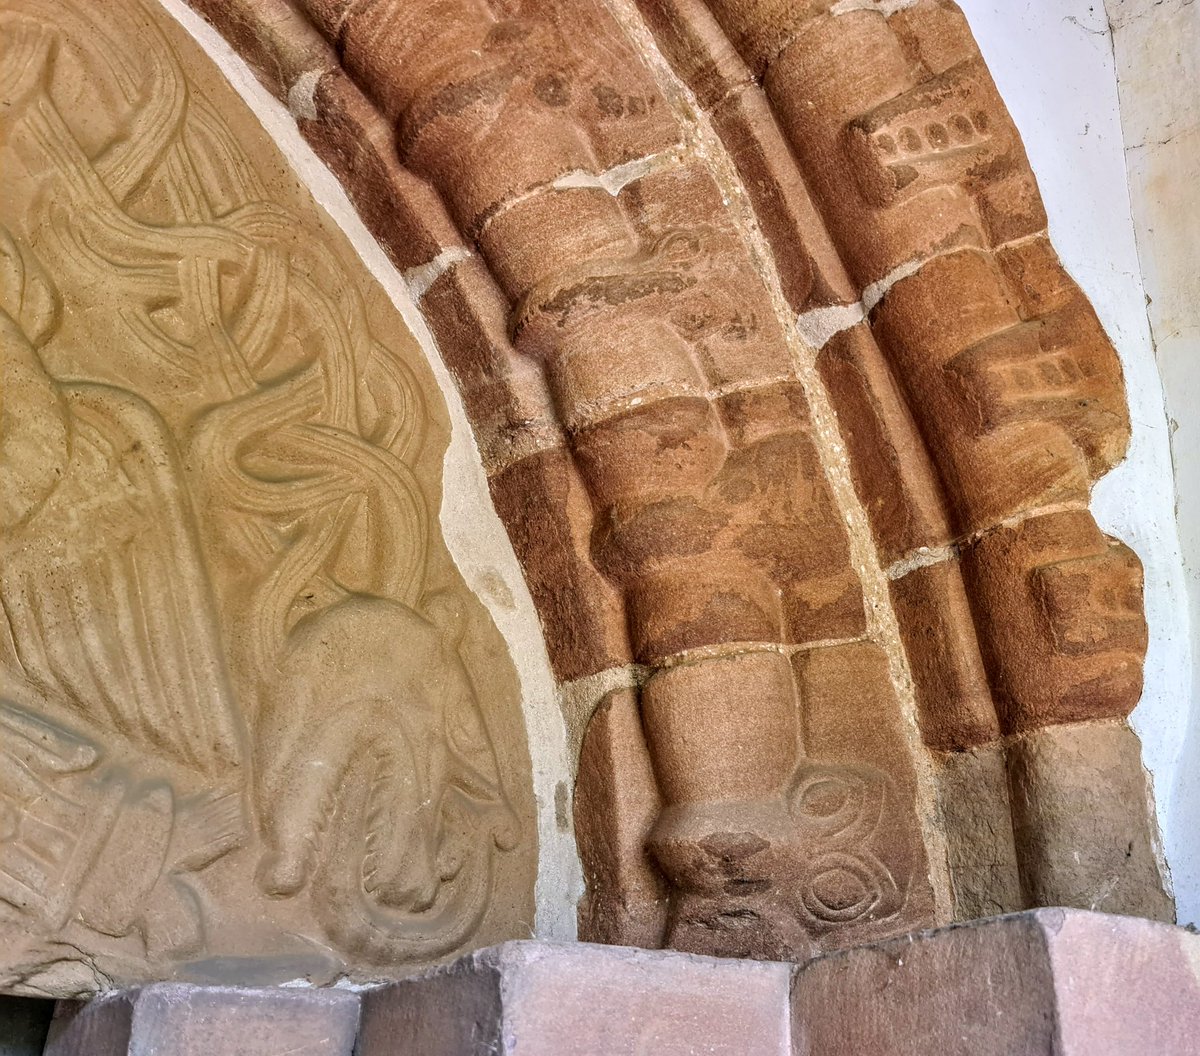 Sandstone Norman Tympanum and the only complete beakheads in Worcestershire. Christ with angels &  biting dragons at St Kenelm, Romsley. 

#tympanumtuesday #stkenelm #clent #dragons #beakheads #romanesque